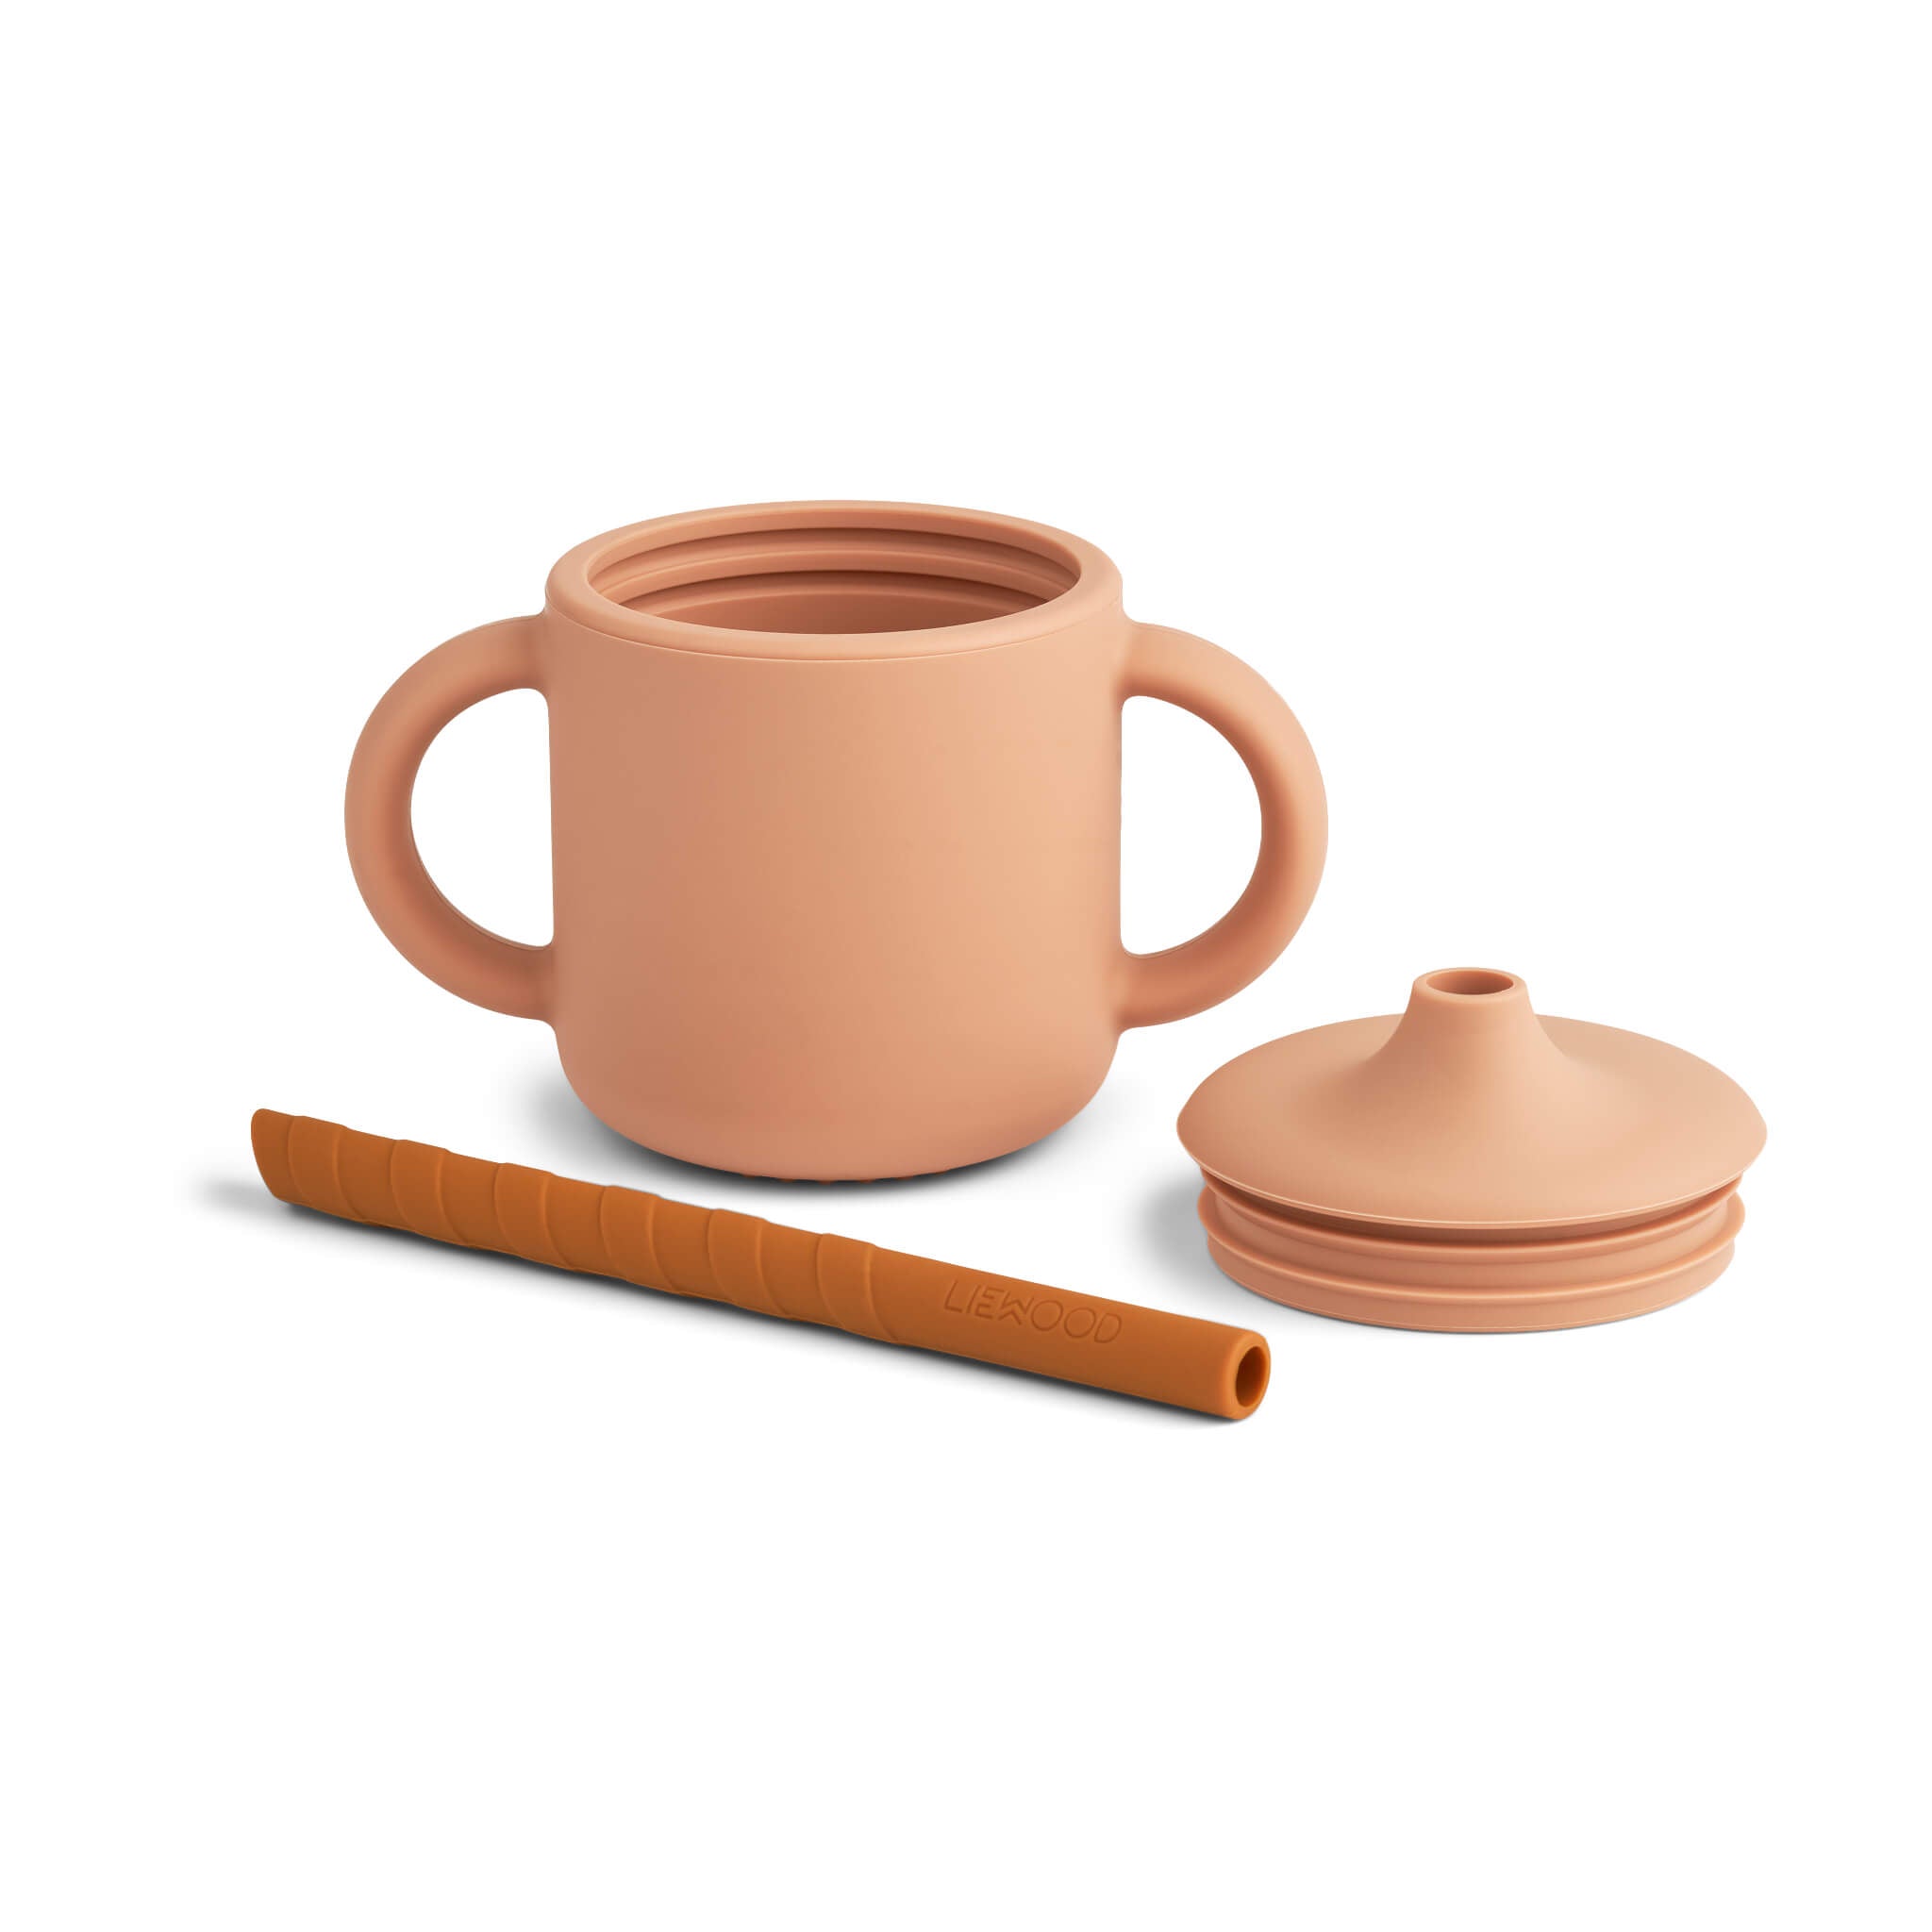 Cameron Sippy Cup - Mustard/Tuscany Rose